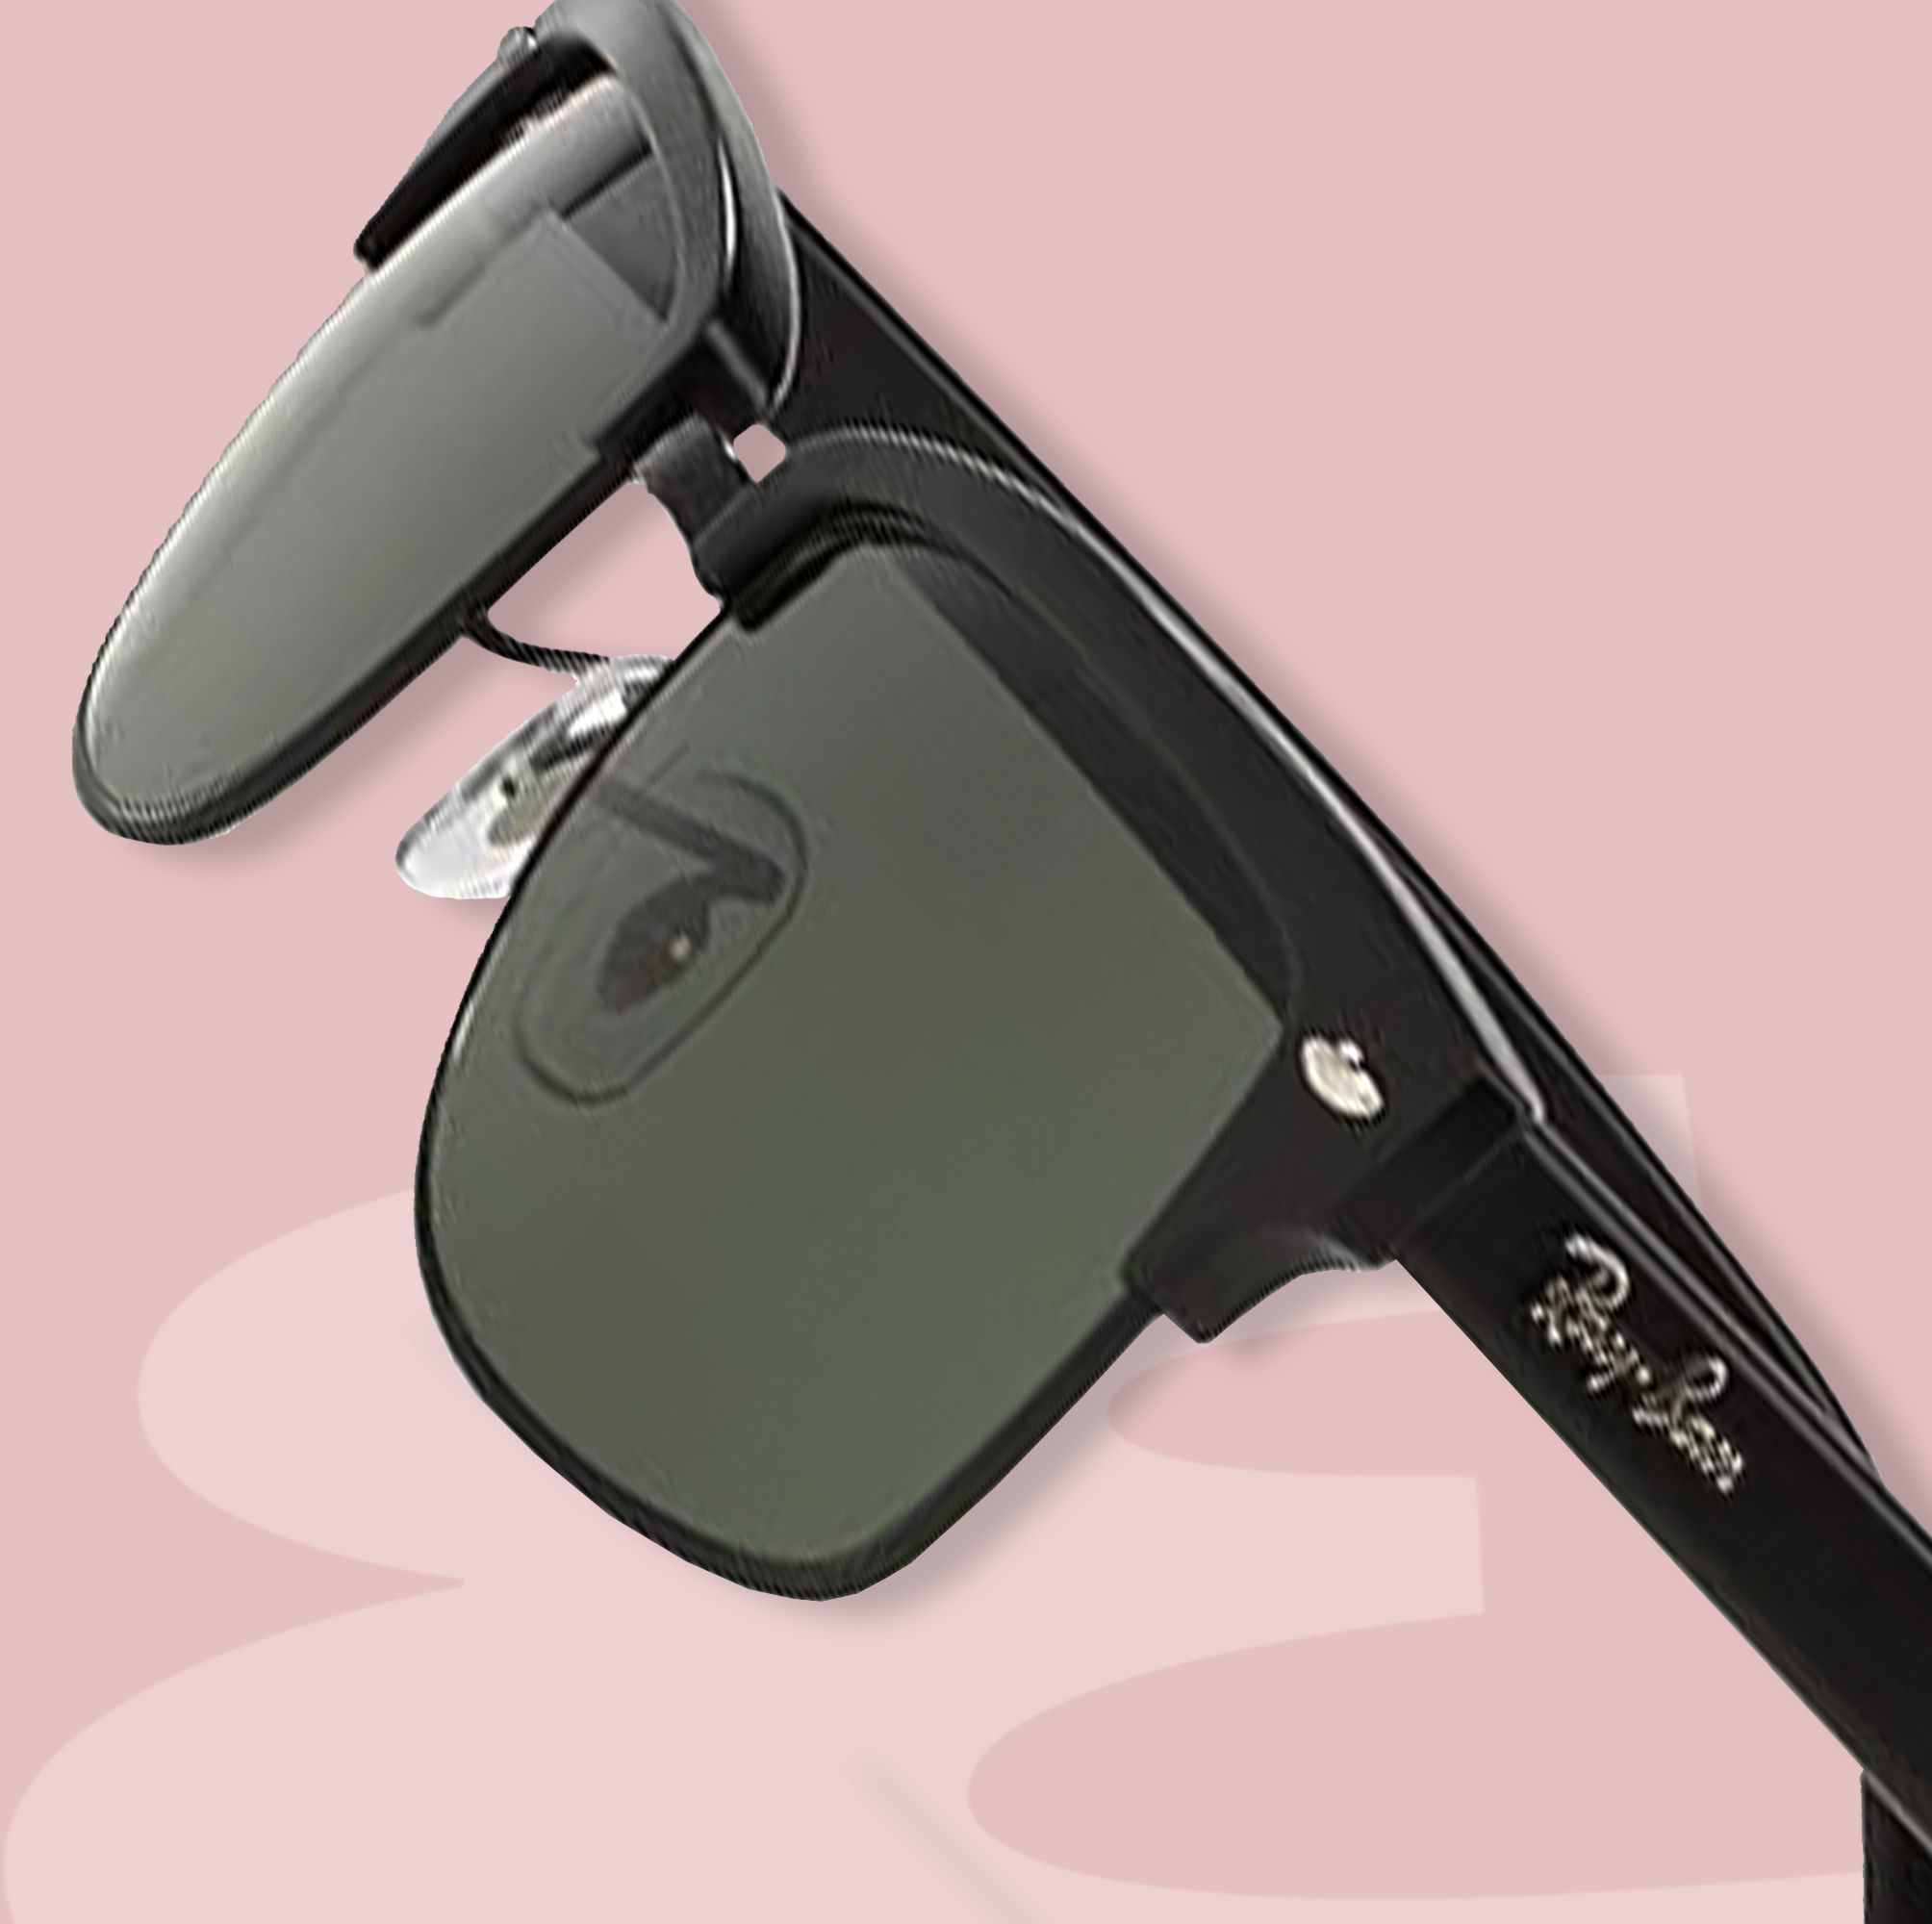 The 19 Freshest Sunglasses You Can Find On Amazon